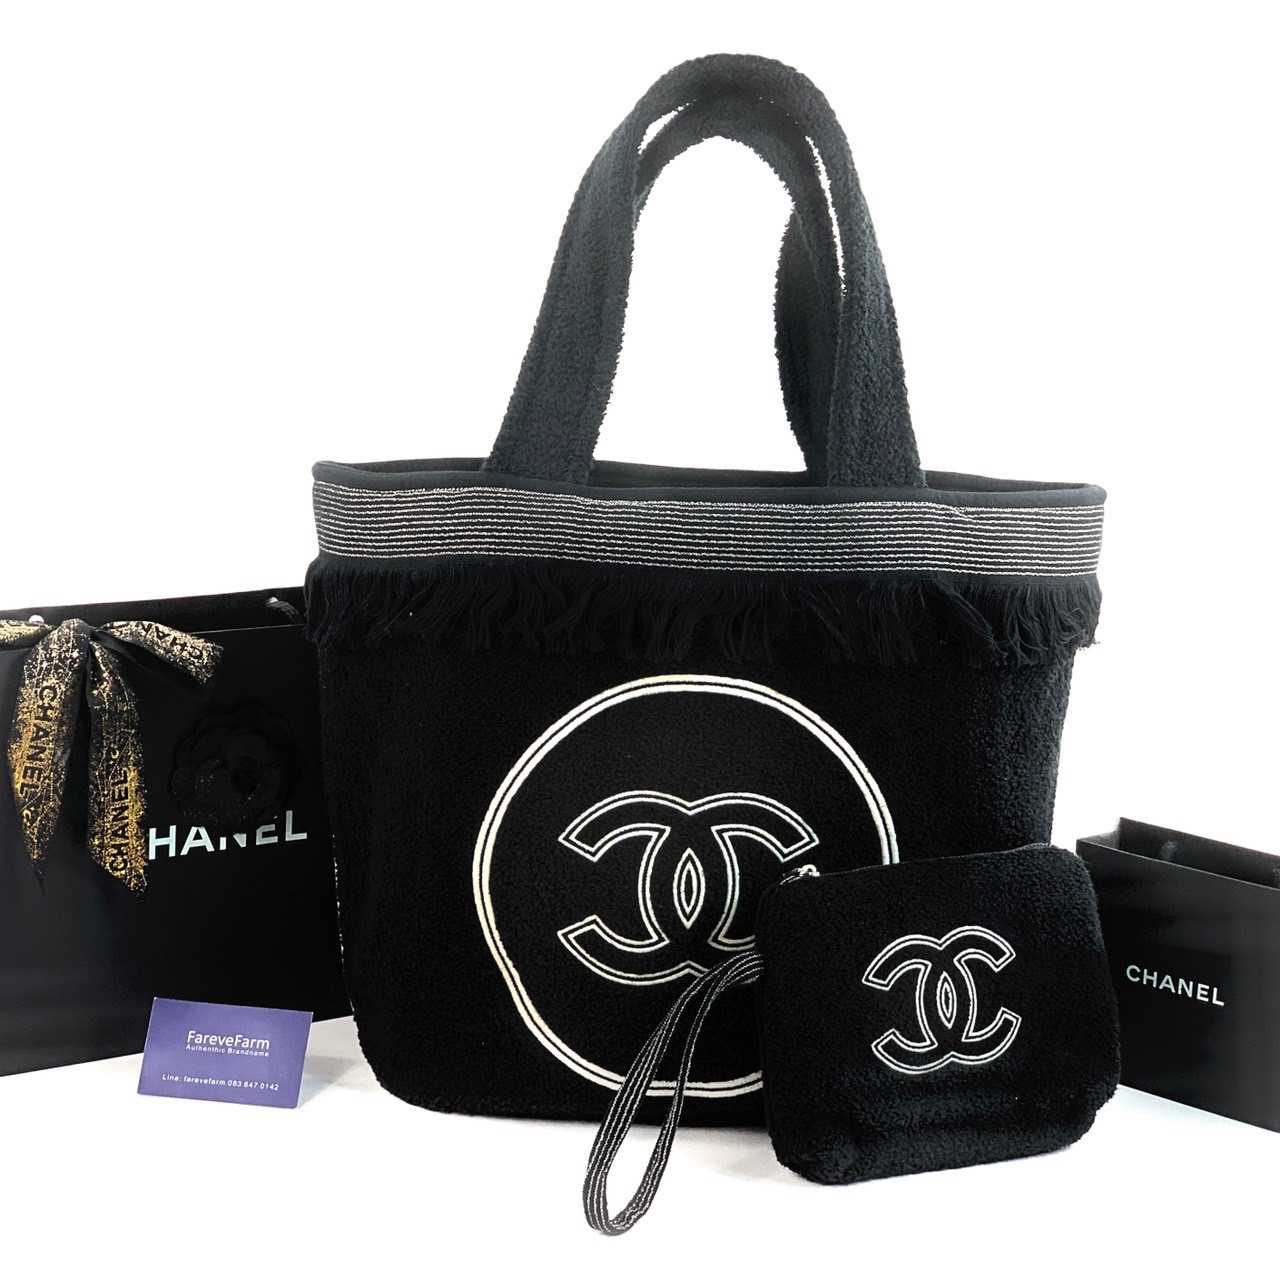 Chanel Multicolor Cotton Fabric CC Terrycloth Beach Bag and Towel Set Chanel